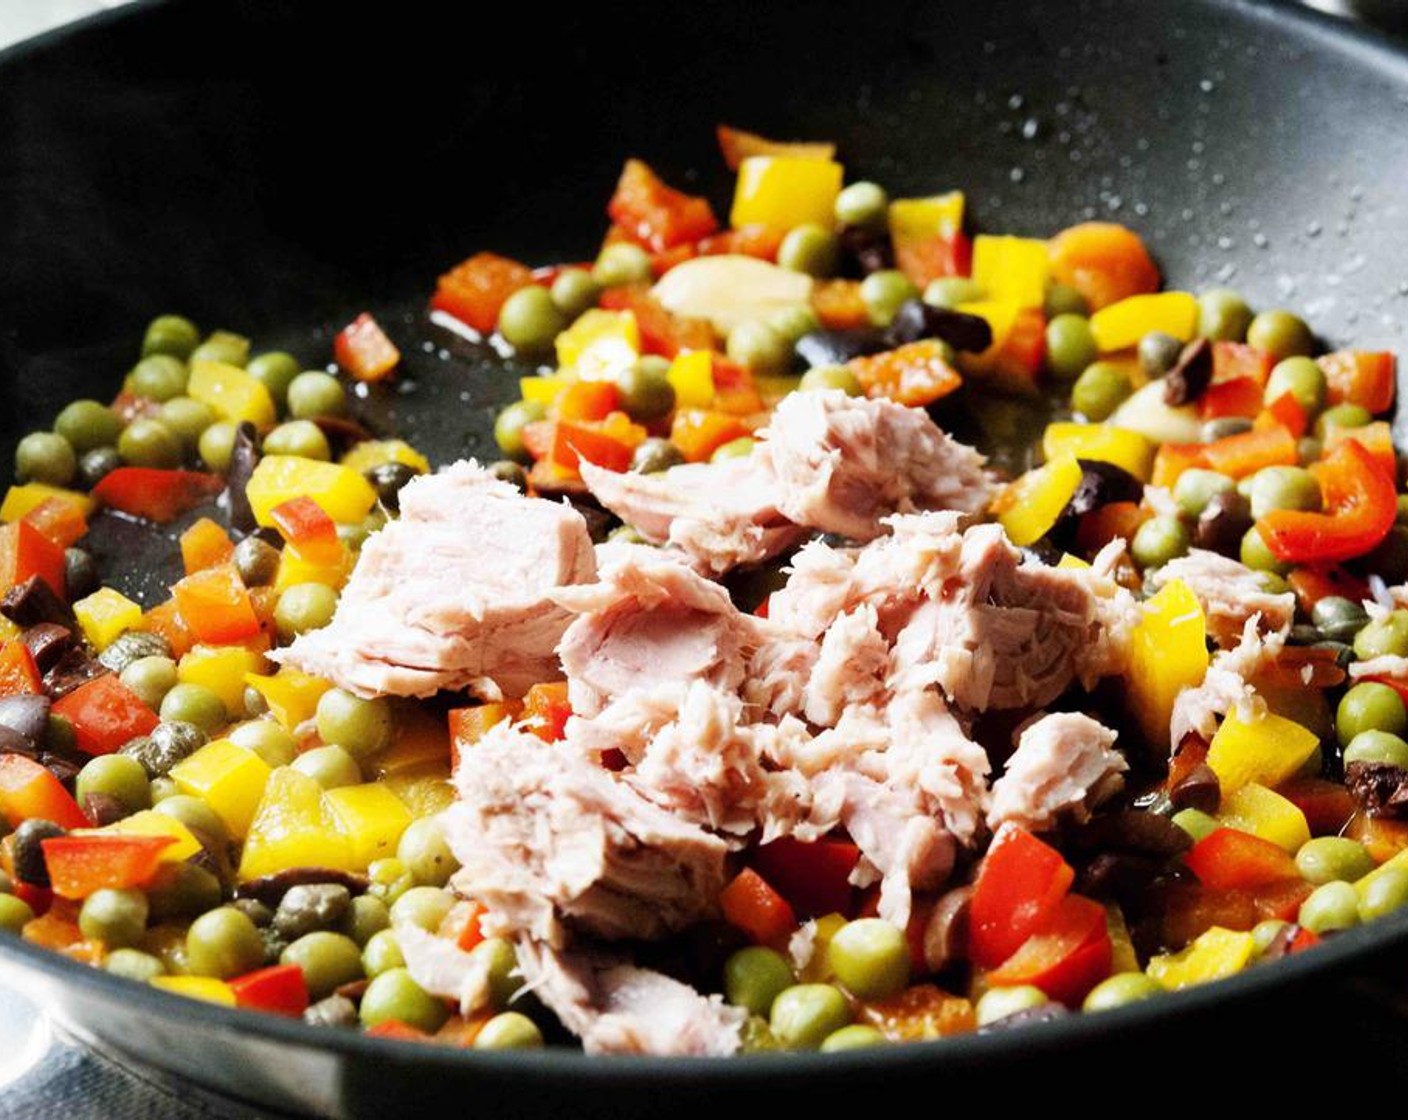 step 5 Remove from the heat and stir in the Canned Tuna (1/3 cup). Make sure to leave some bigger chunks for more flavor.